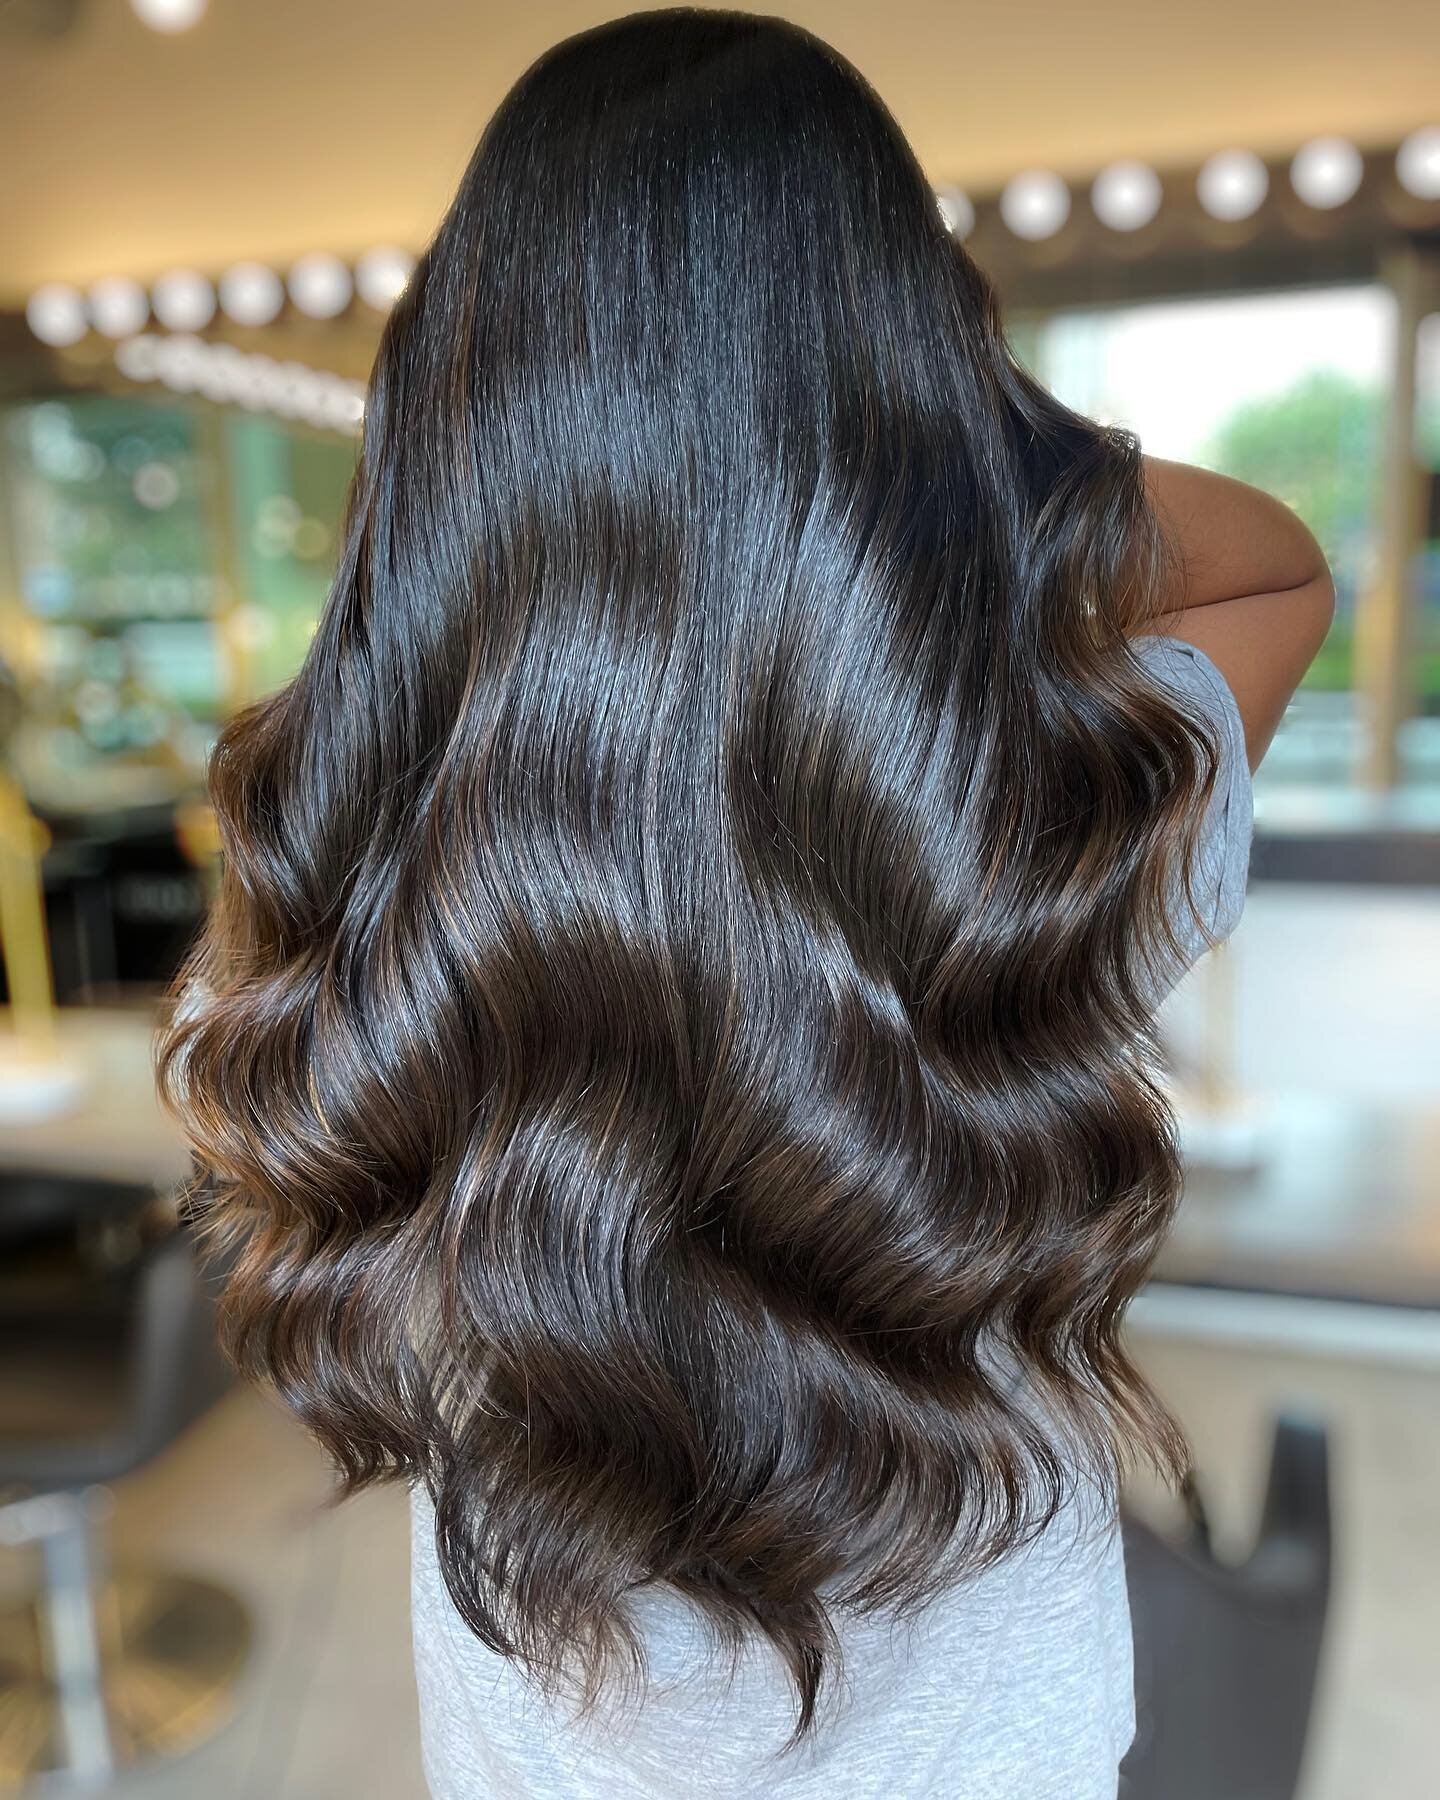 In love with this LC SIGNATURE BALAYAGE 

❤️ 

Usin 7M and 4M @redken 

#Haircolorbylorenacastro #haircolor #haircolorist #haircolortrends #haircolorinspo #hairinspiration #beforeandafterhair #hairtransformation #livedinhair #balayge #balyagehighligh